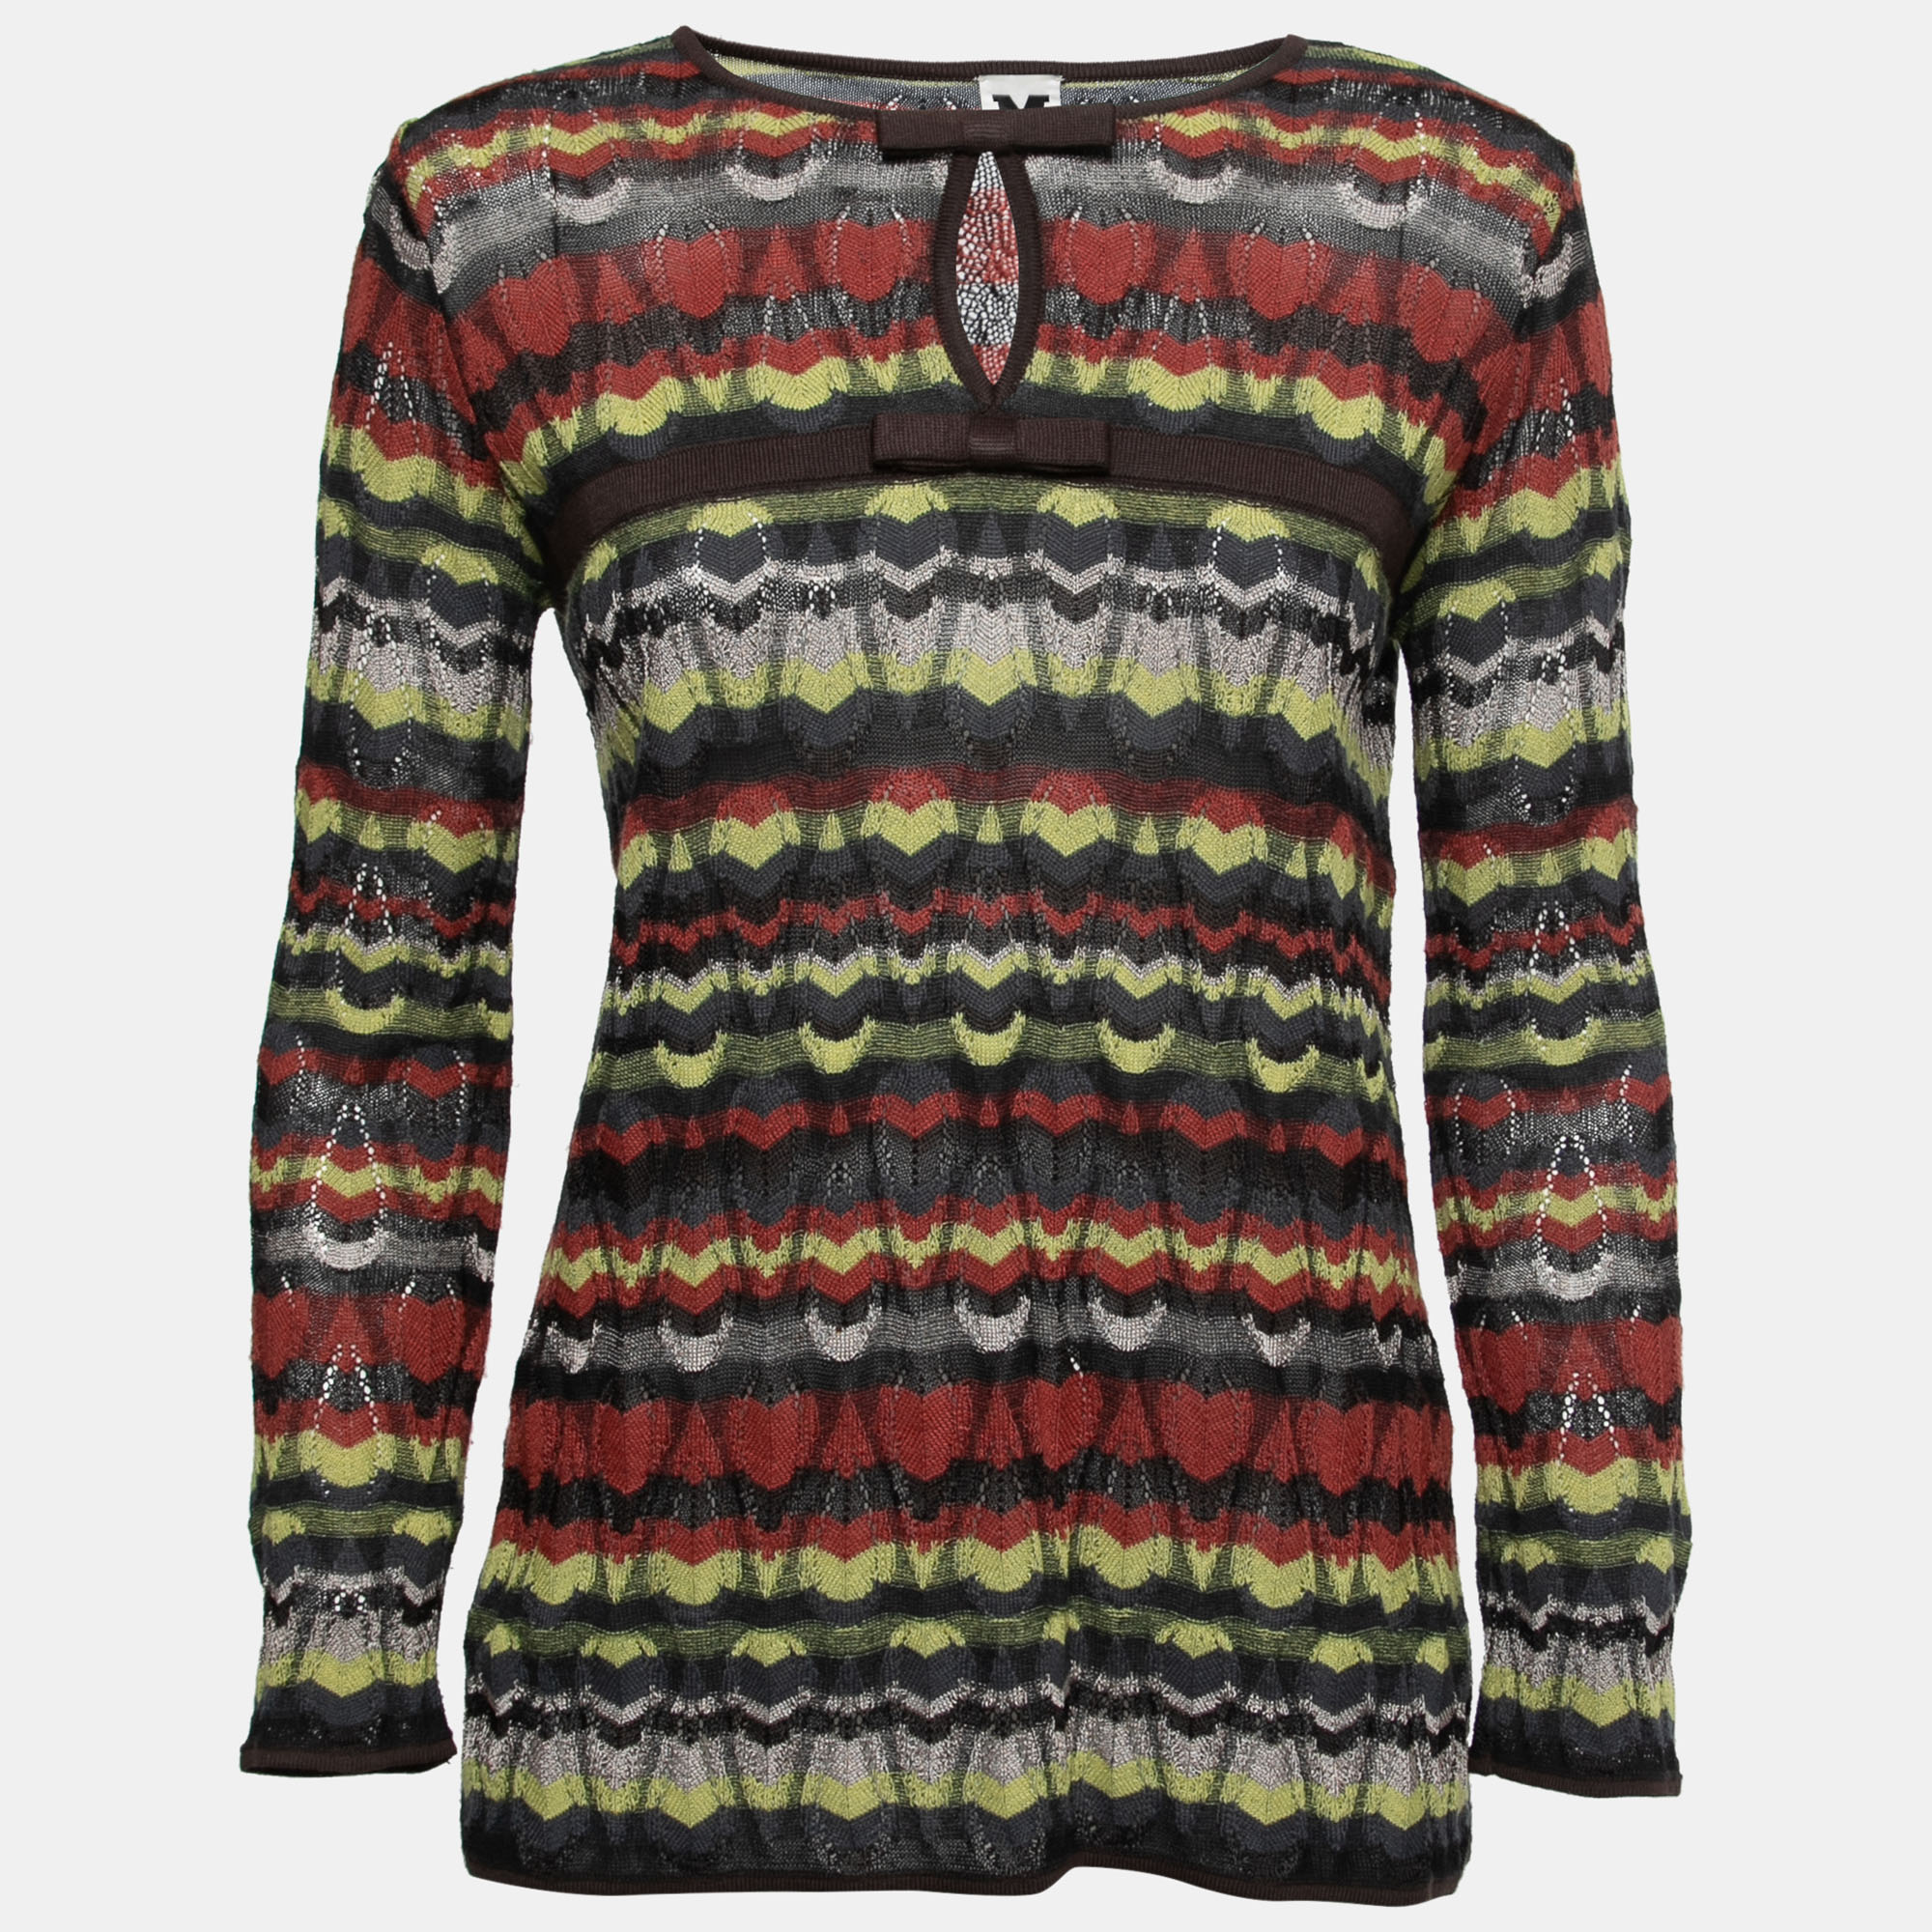 M Missoni Multicolor Patterned Knit Bow Detail Top S